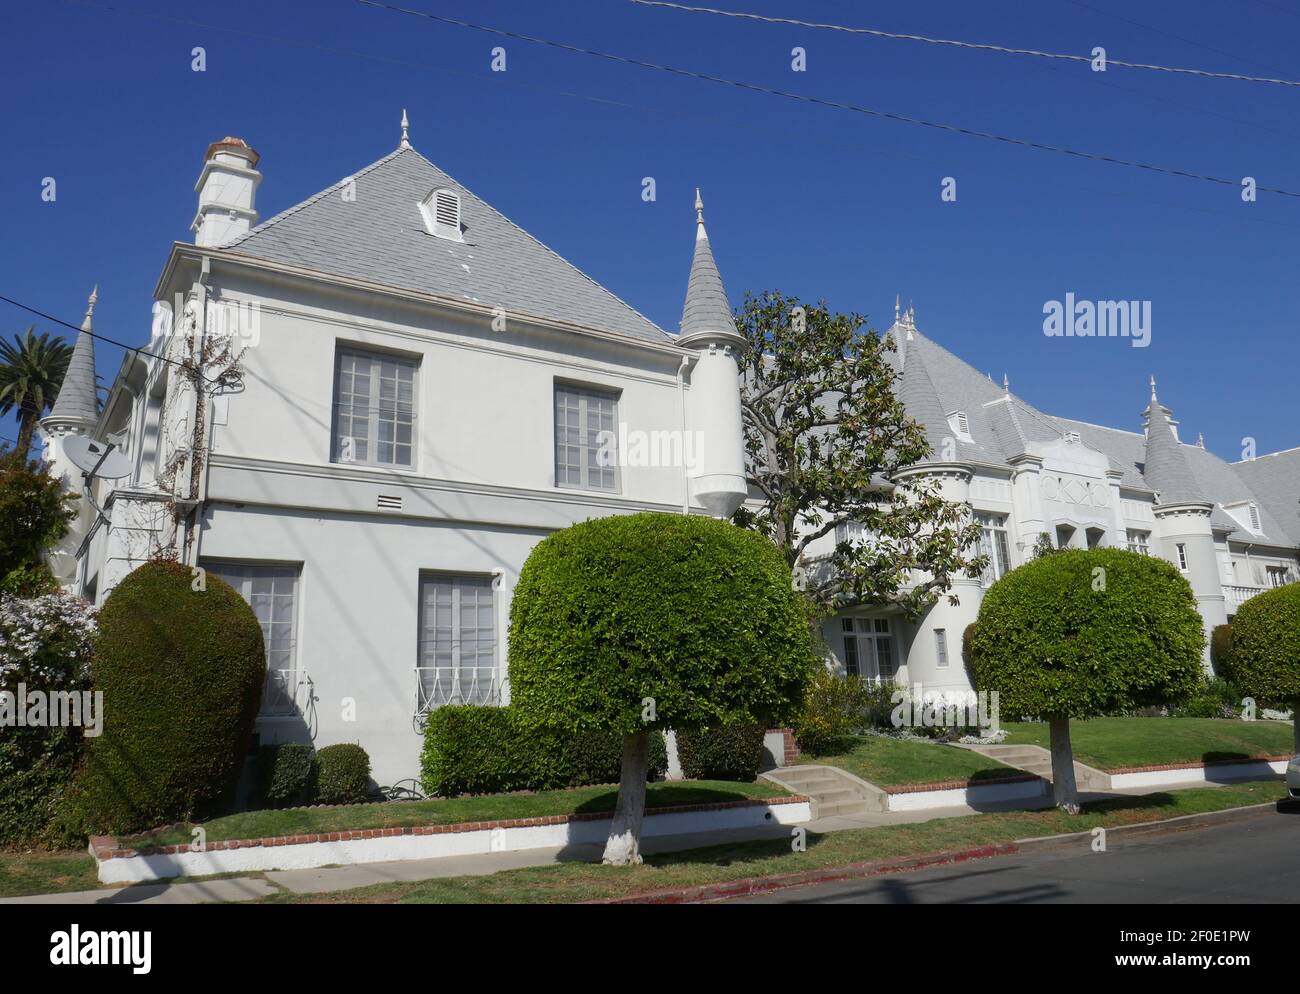 Los Angeles, California, USA 7th March 2021 A general view of atmosphere of Singer Madonna and actor Sean Penn's former home/residence on March 7, 2021 in Los Angeles, California, USA. Photo by Barry King/Alamy Stock Photo Stock Photo